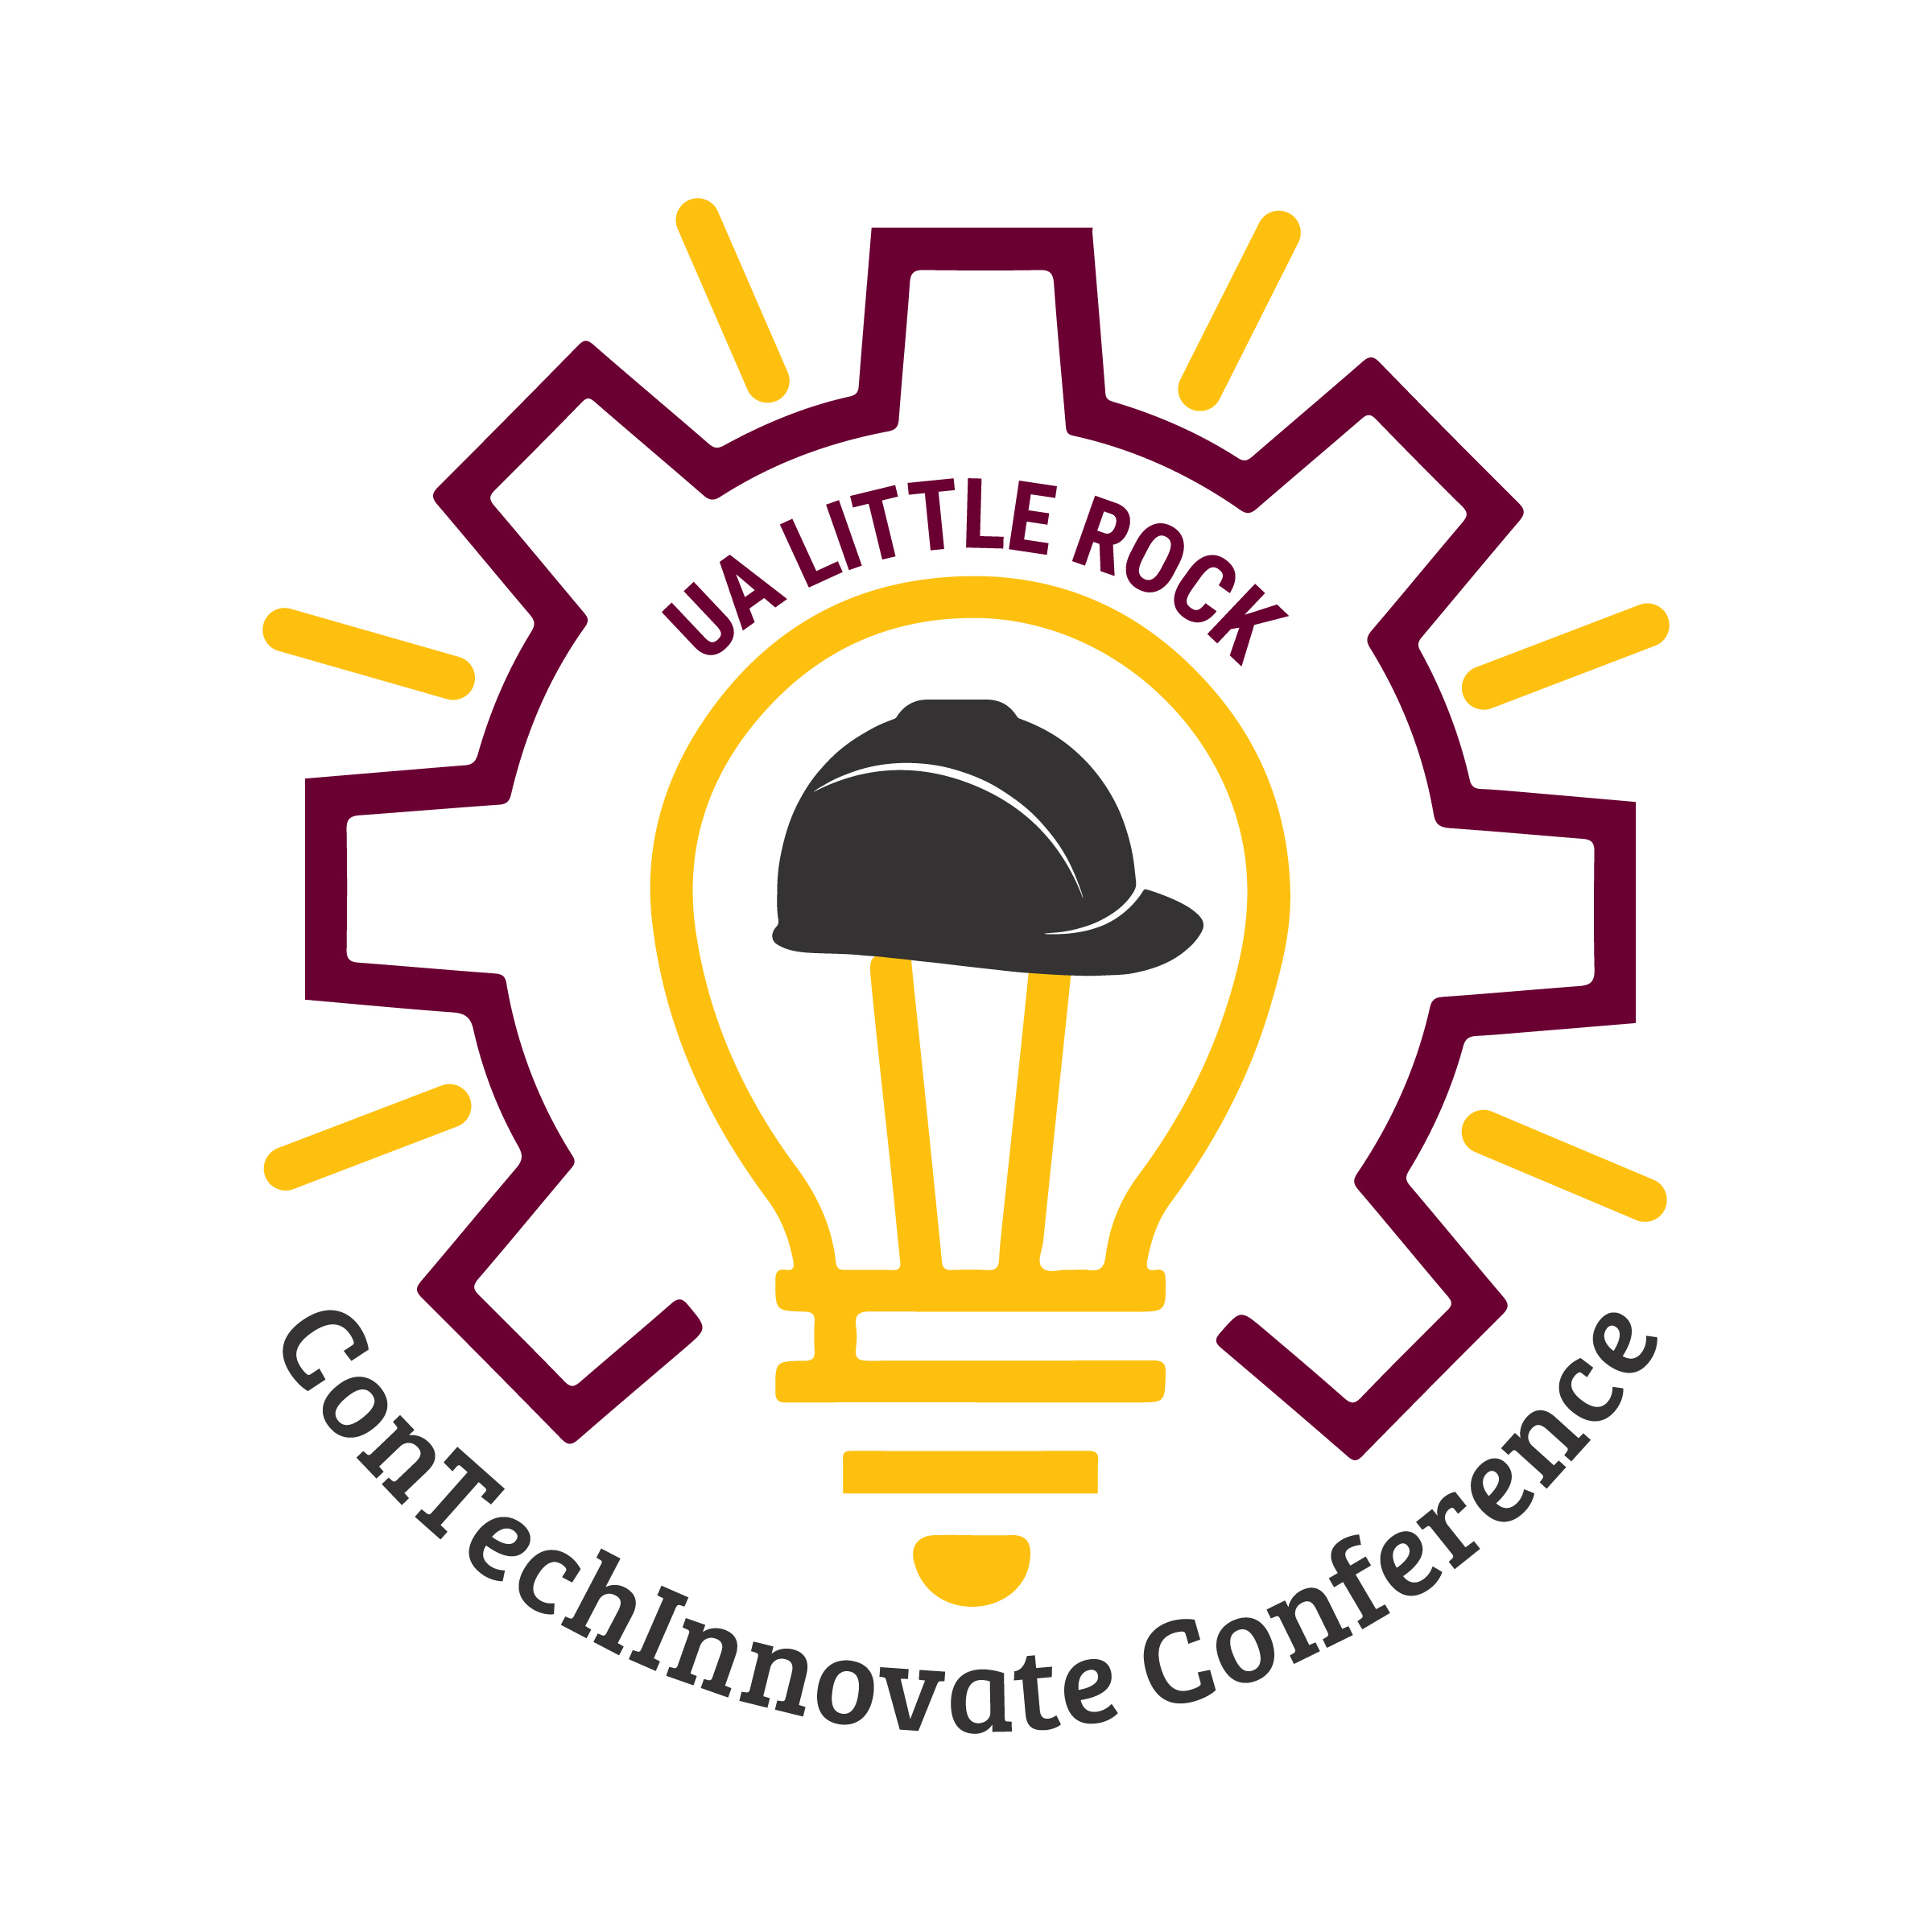 The University of Arkansas at Little Rock will host the first ConTechInnovate Conference Oct. 5-6. The inaugural conference is focused on advancing the construction industry through emerging technologies.